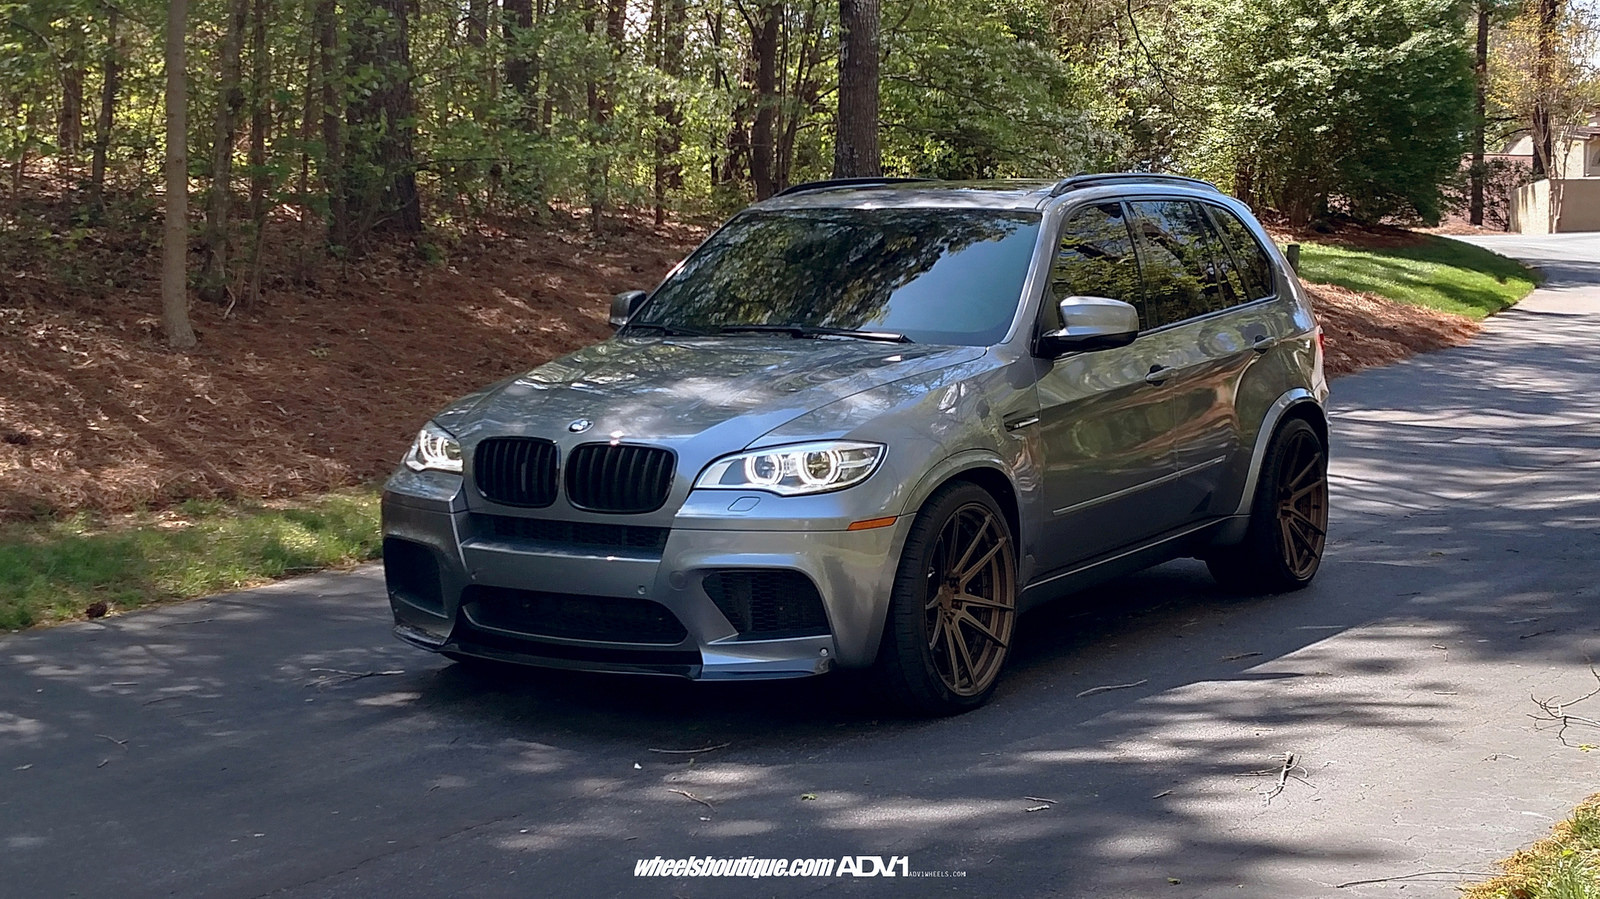 BMW X5 M Wrapped in ADV.1 Wheels, Installation by Wheels Boutique